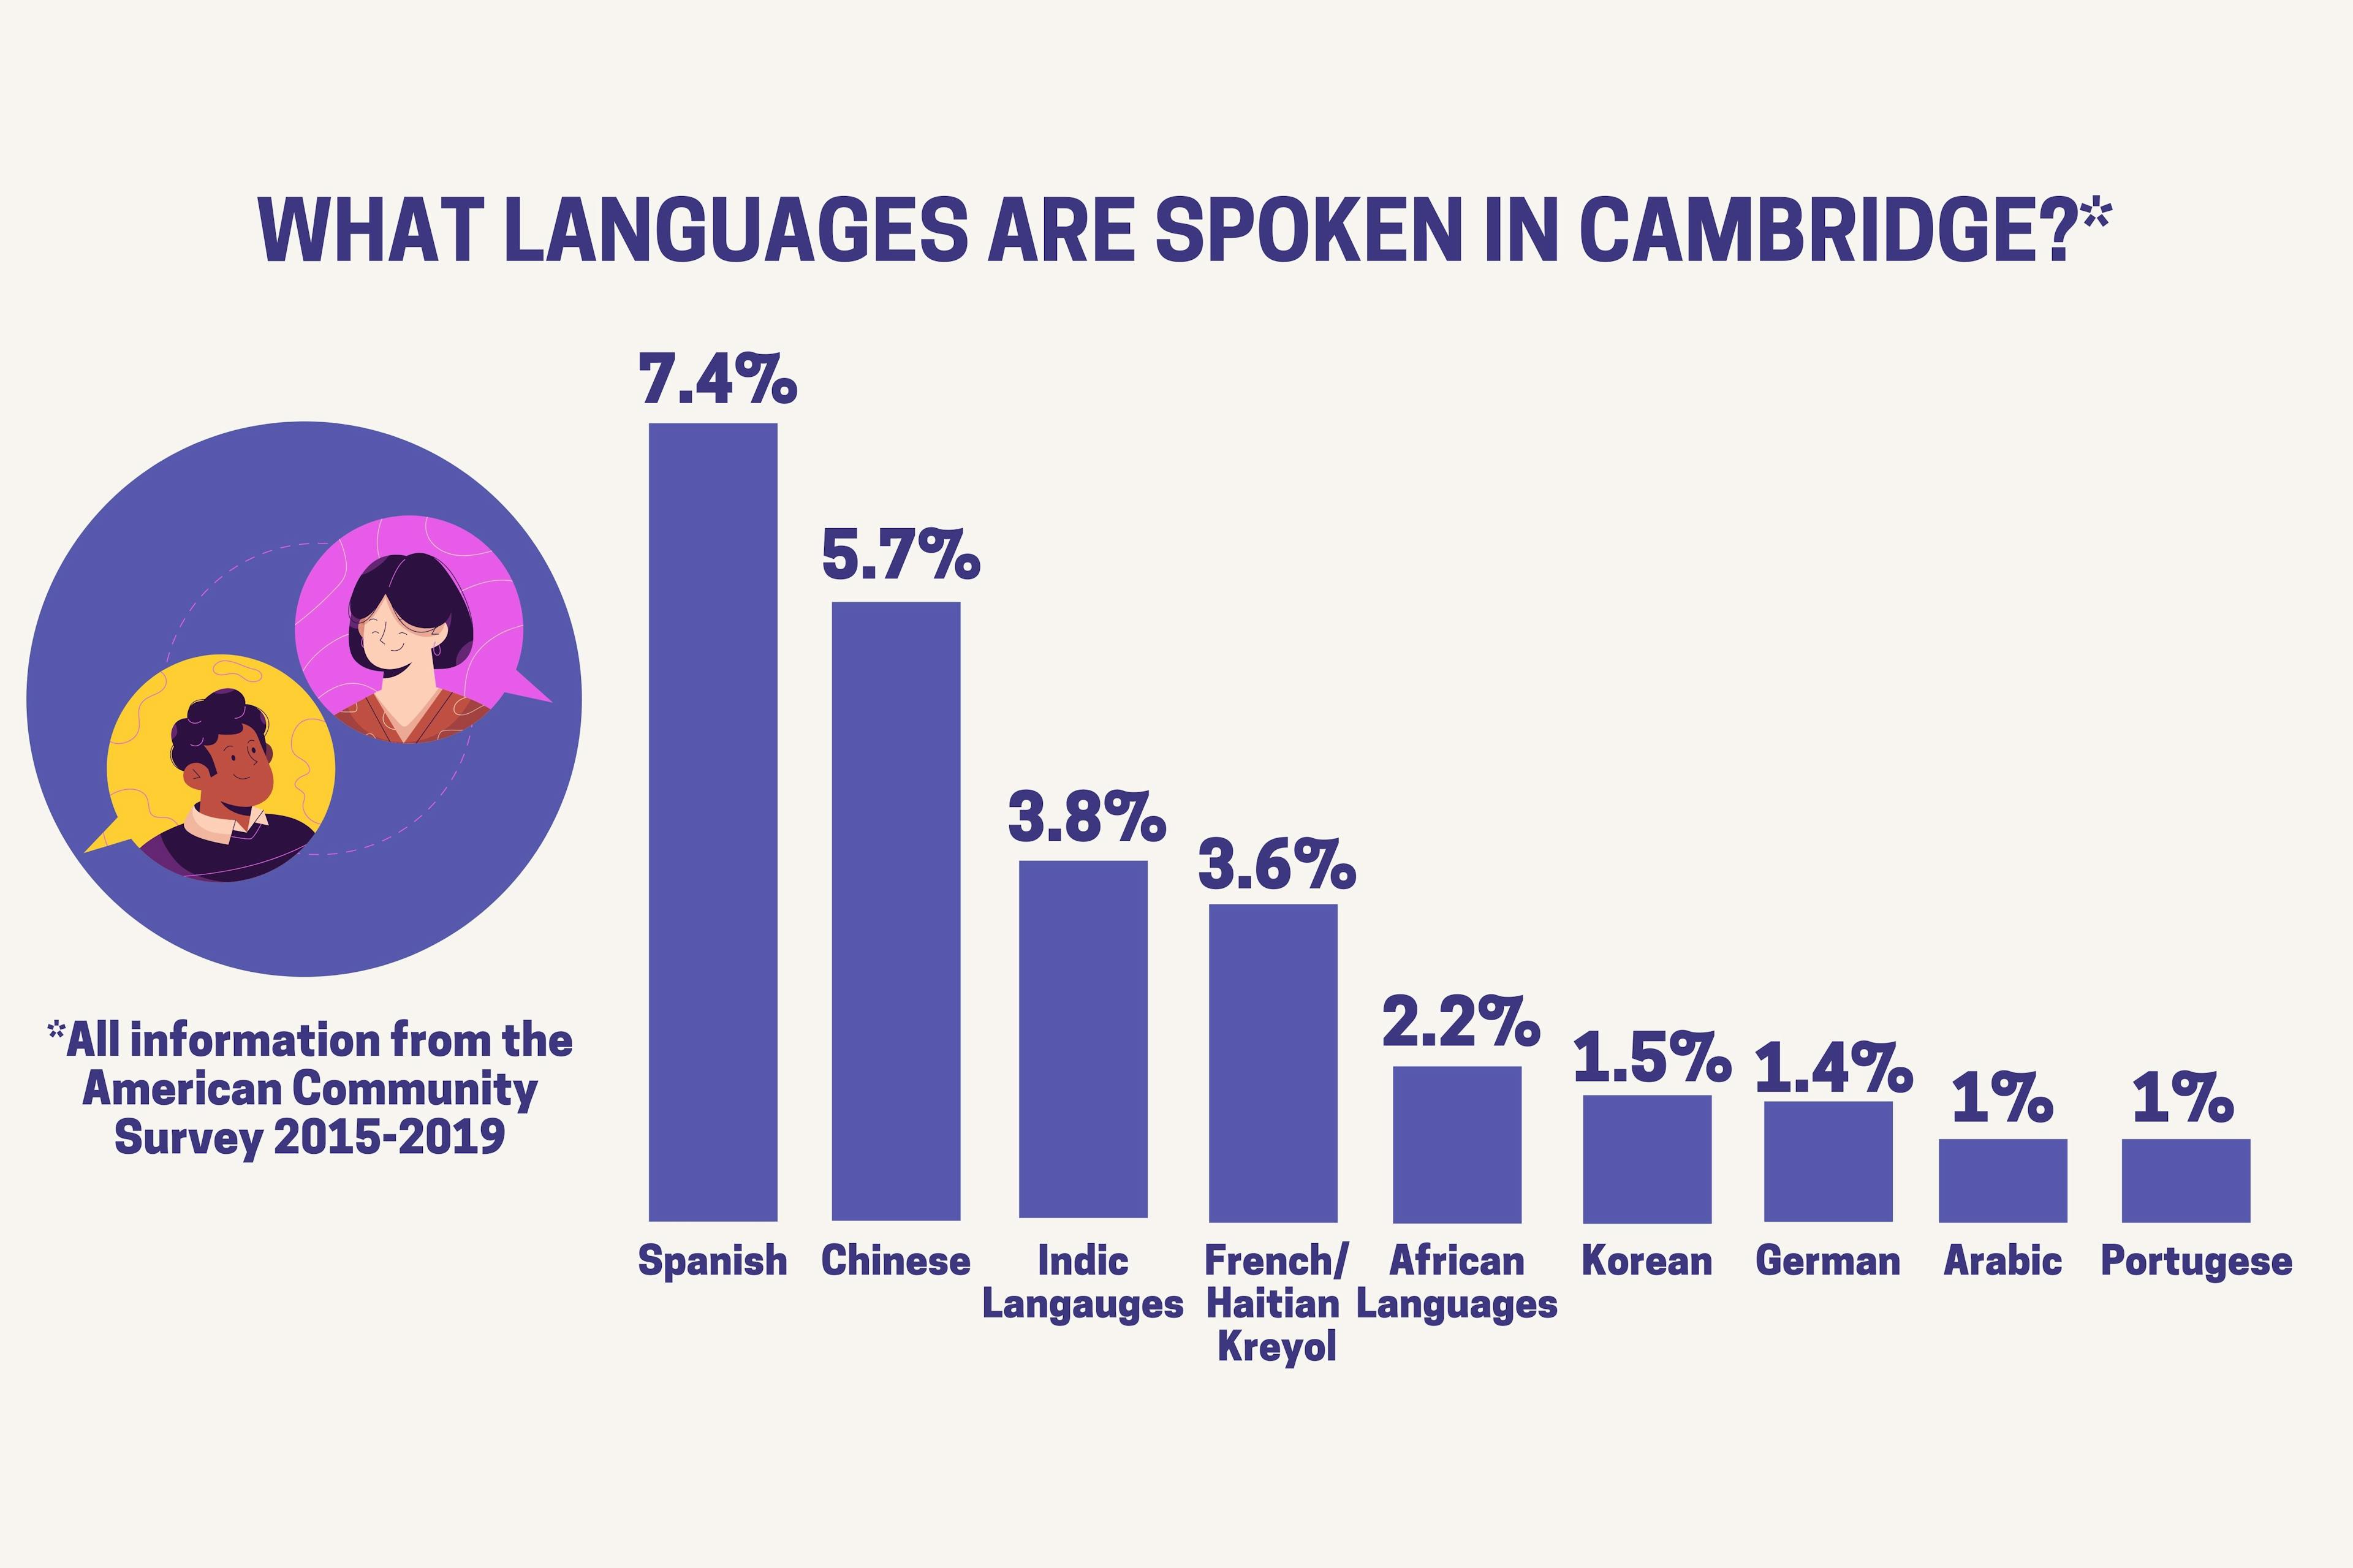 A graphic depicting what languages are spoken in Cambridge from the American Community Survey 2016-2019. Spanish 7.4%. Chinese 5.7%. Indic. Languages 3.8%. French/Haitian Kreyol 3.6%. African Languages 2.2%. Korean 1.5%. German 1.4%. Arabic 1%. Portuguese 1%.